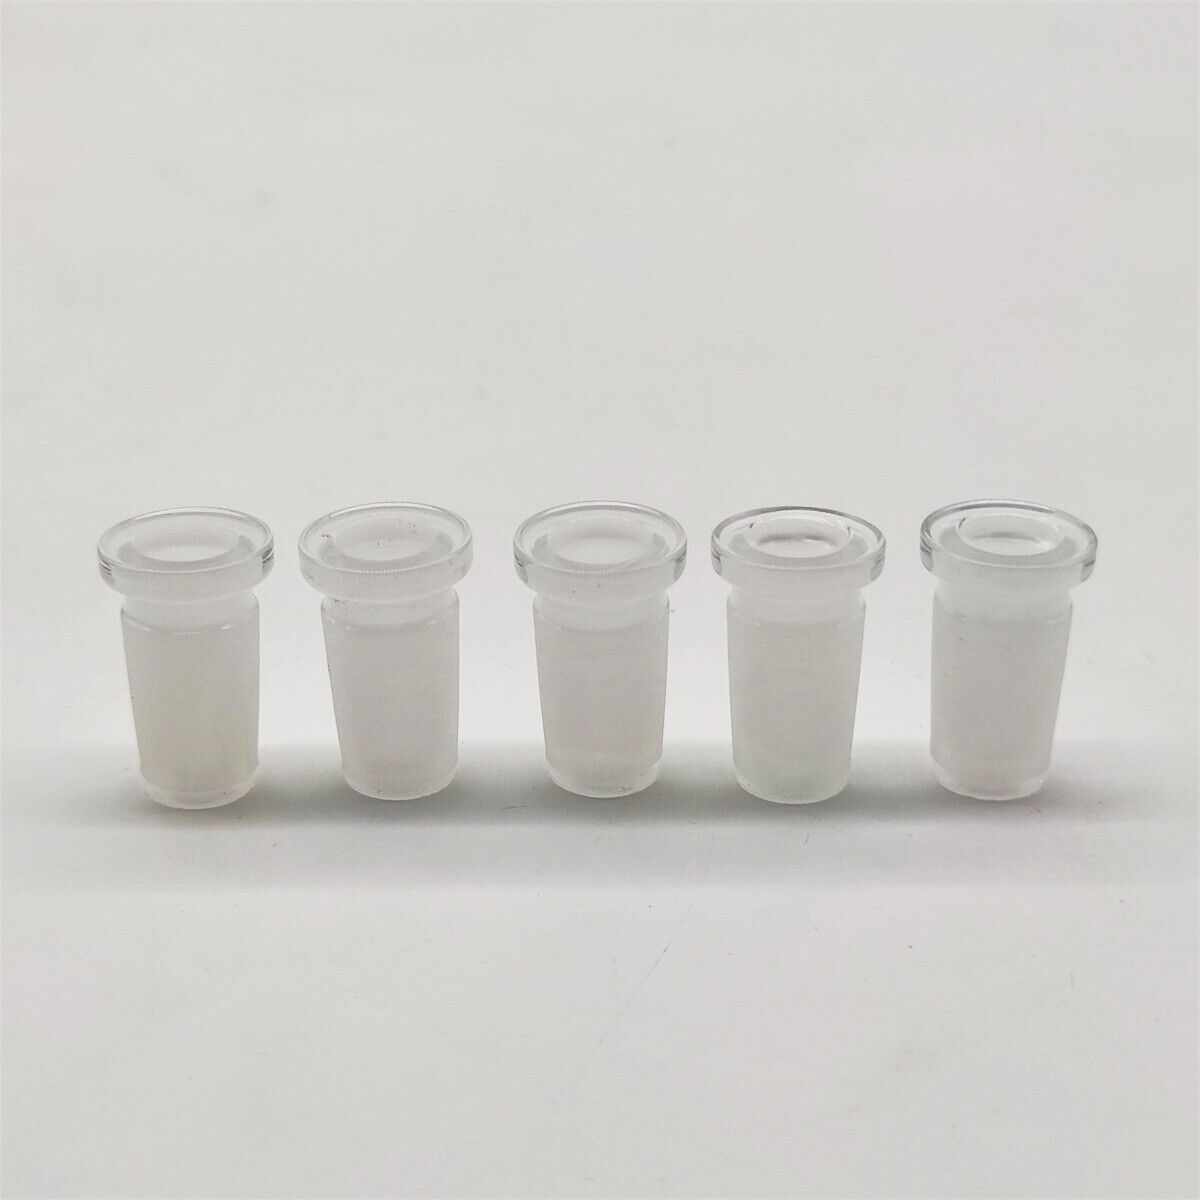 5 Pcs 10MM glass Bowl to 14MM Female Joint Clear Glass Adapter For Glass Bong